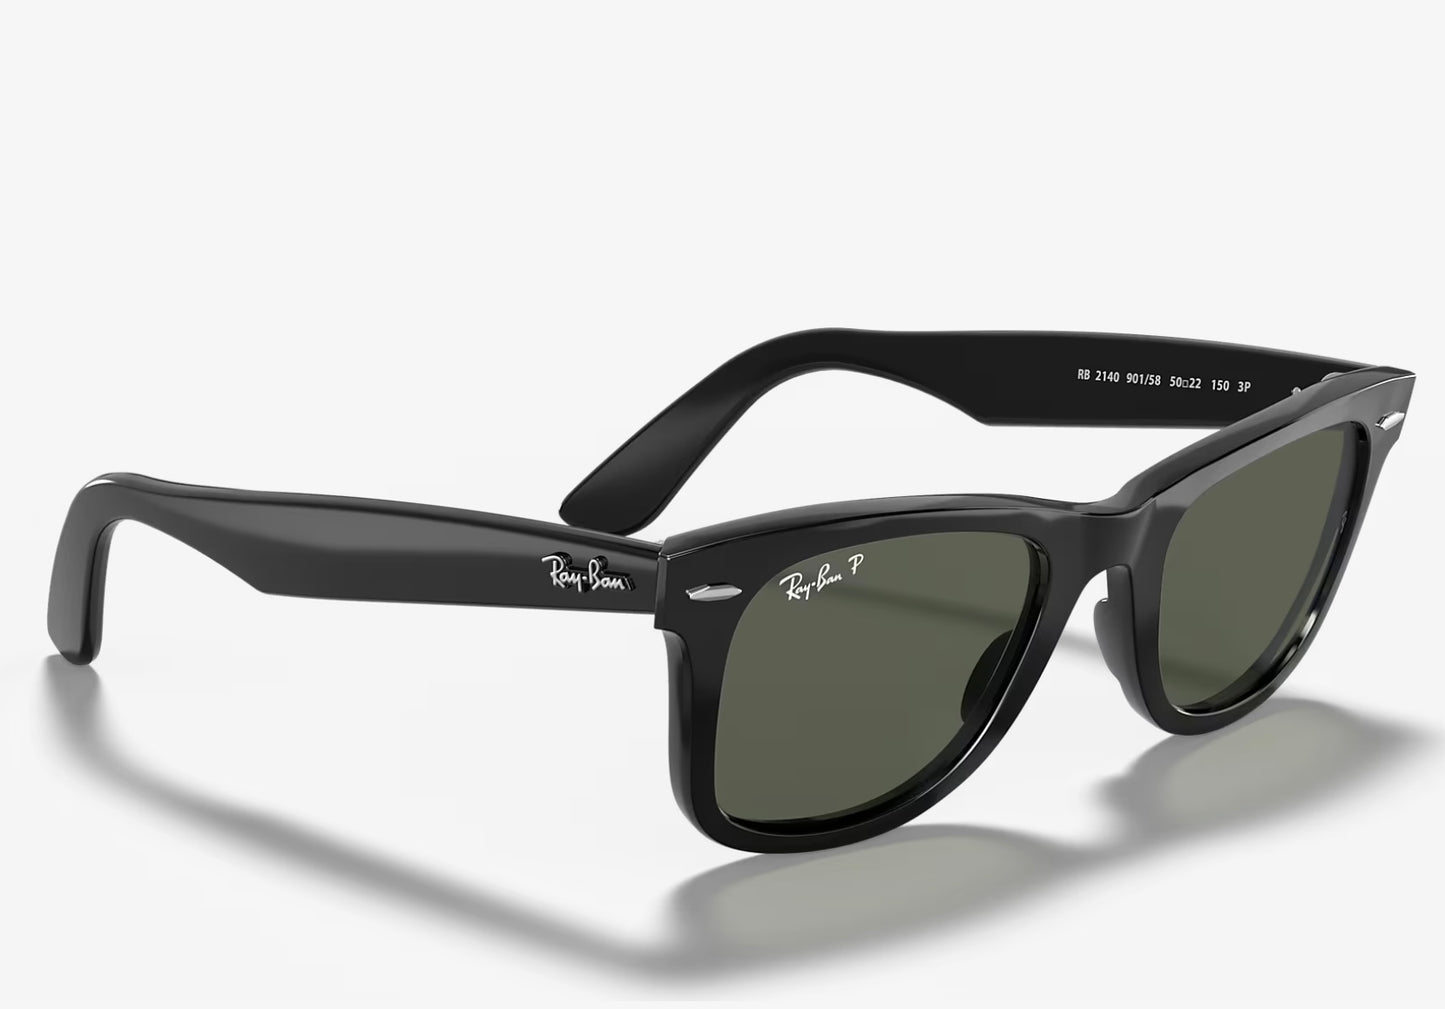 Ray Ban Original Wayfarer Classic 50mm RB 2140 901/58 Black Green Polarized hand made in Italy NEW